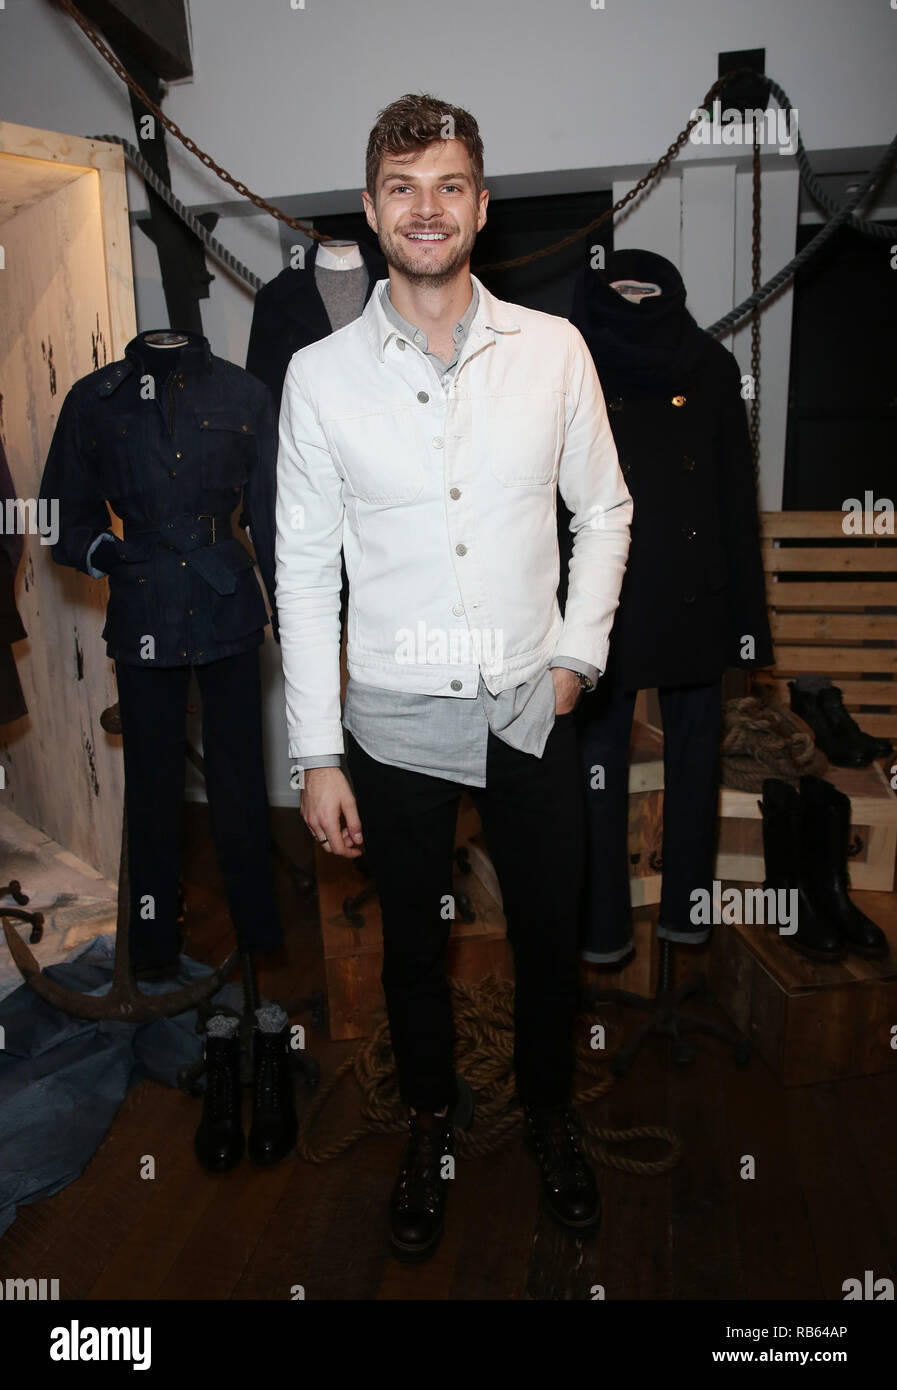 Jim Chapman at the Belstaff presentation during the London Fashion Week Men's AW19 show held at Belstaff House, London. Stock Photo